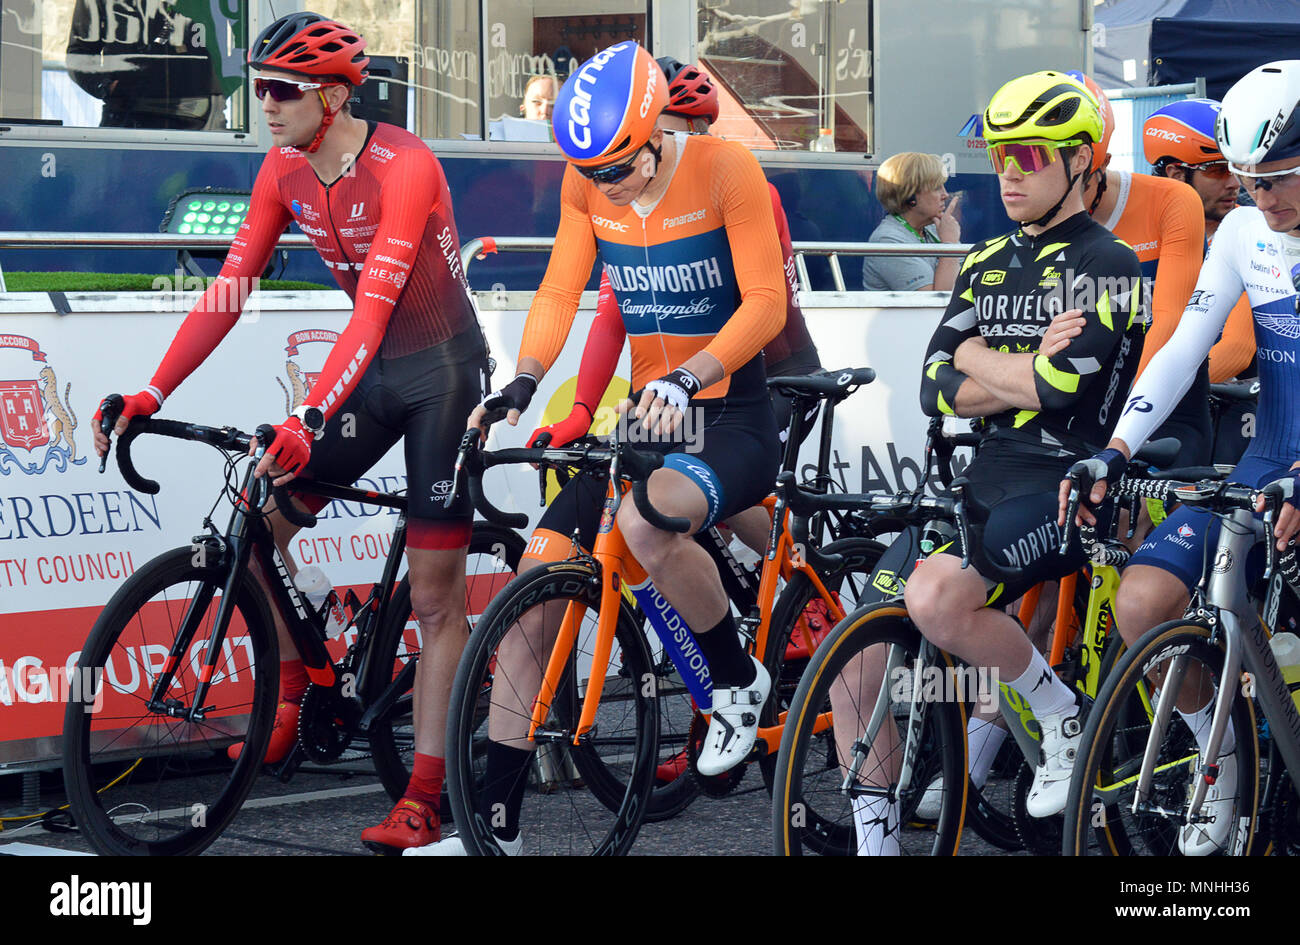 ABERDEEN, SCOTLAND - 17 MAY 2018: Some seem totally relaxed, others total concentration, riders at the start of the Tour Series cycle race on Union Street Credit: Douglas MacKenzie/Alamy Live News Stock Photo